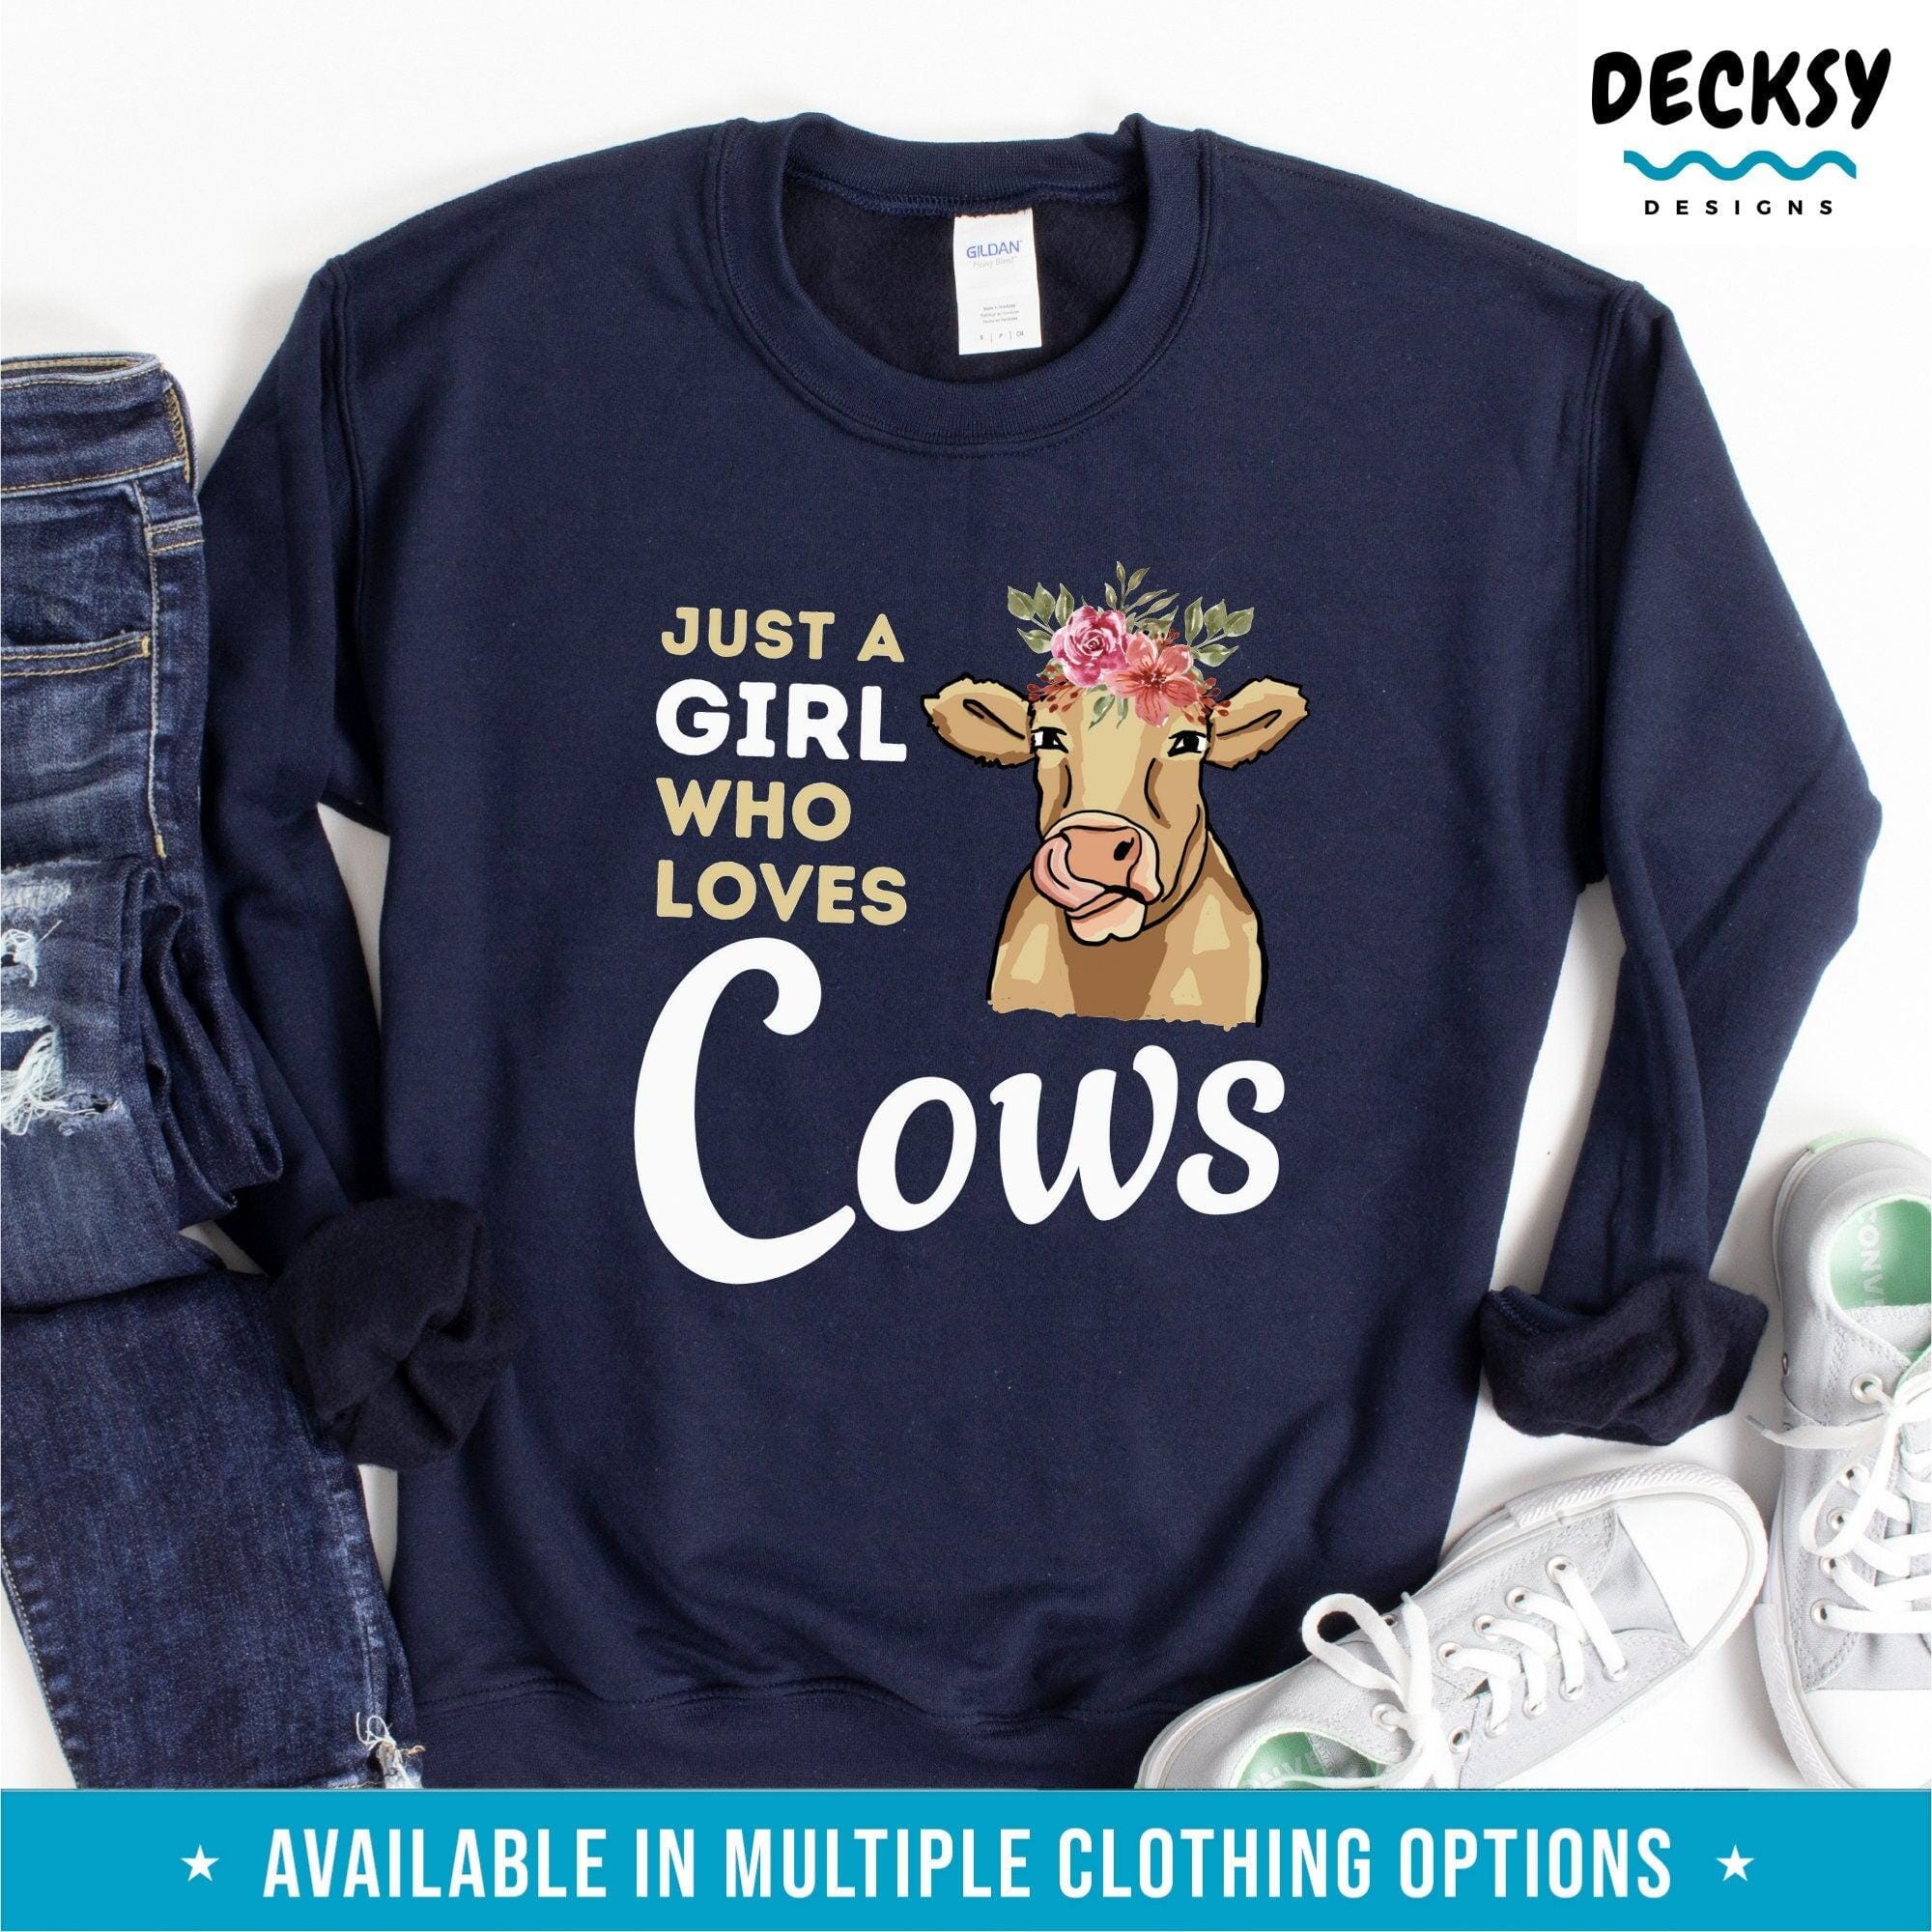 Cow Shirt, Gift For Farm Animal Lover-Clothing:Gender-Neutral Adult Clothing:Tops & Tees:T-shirts:Graphic Tees-DecksyDesigns